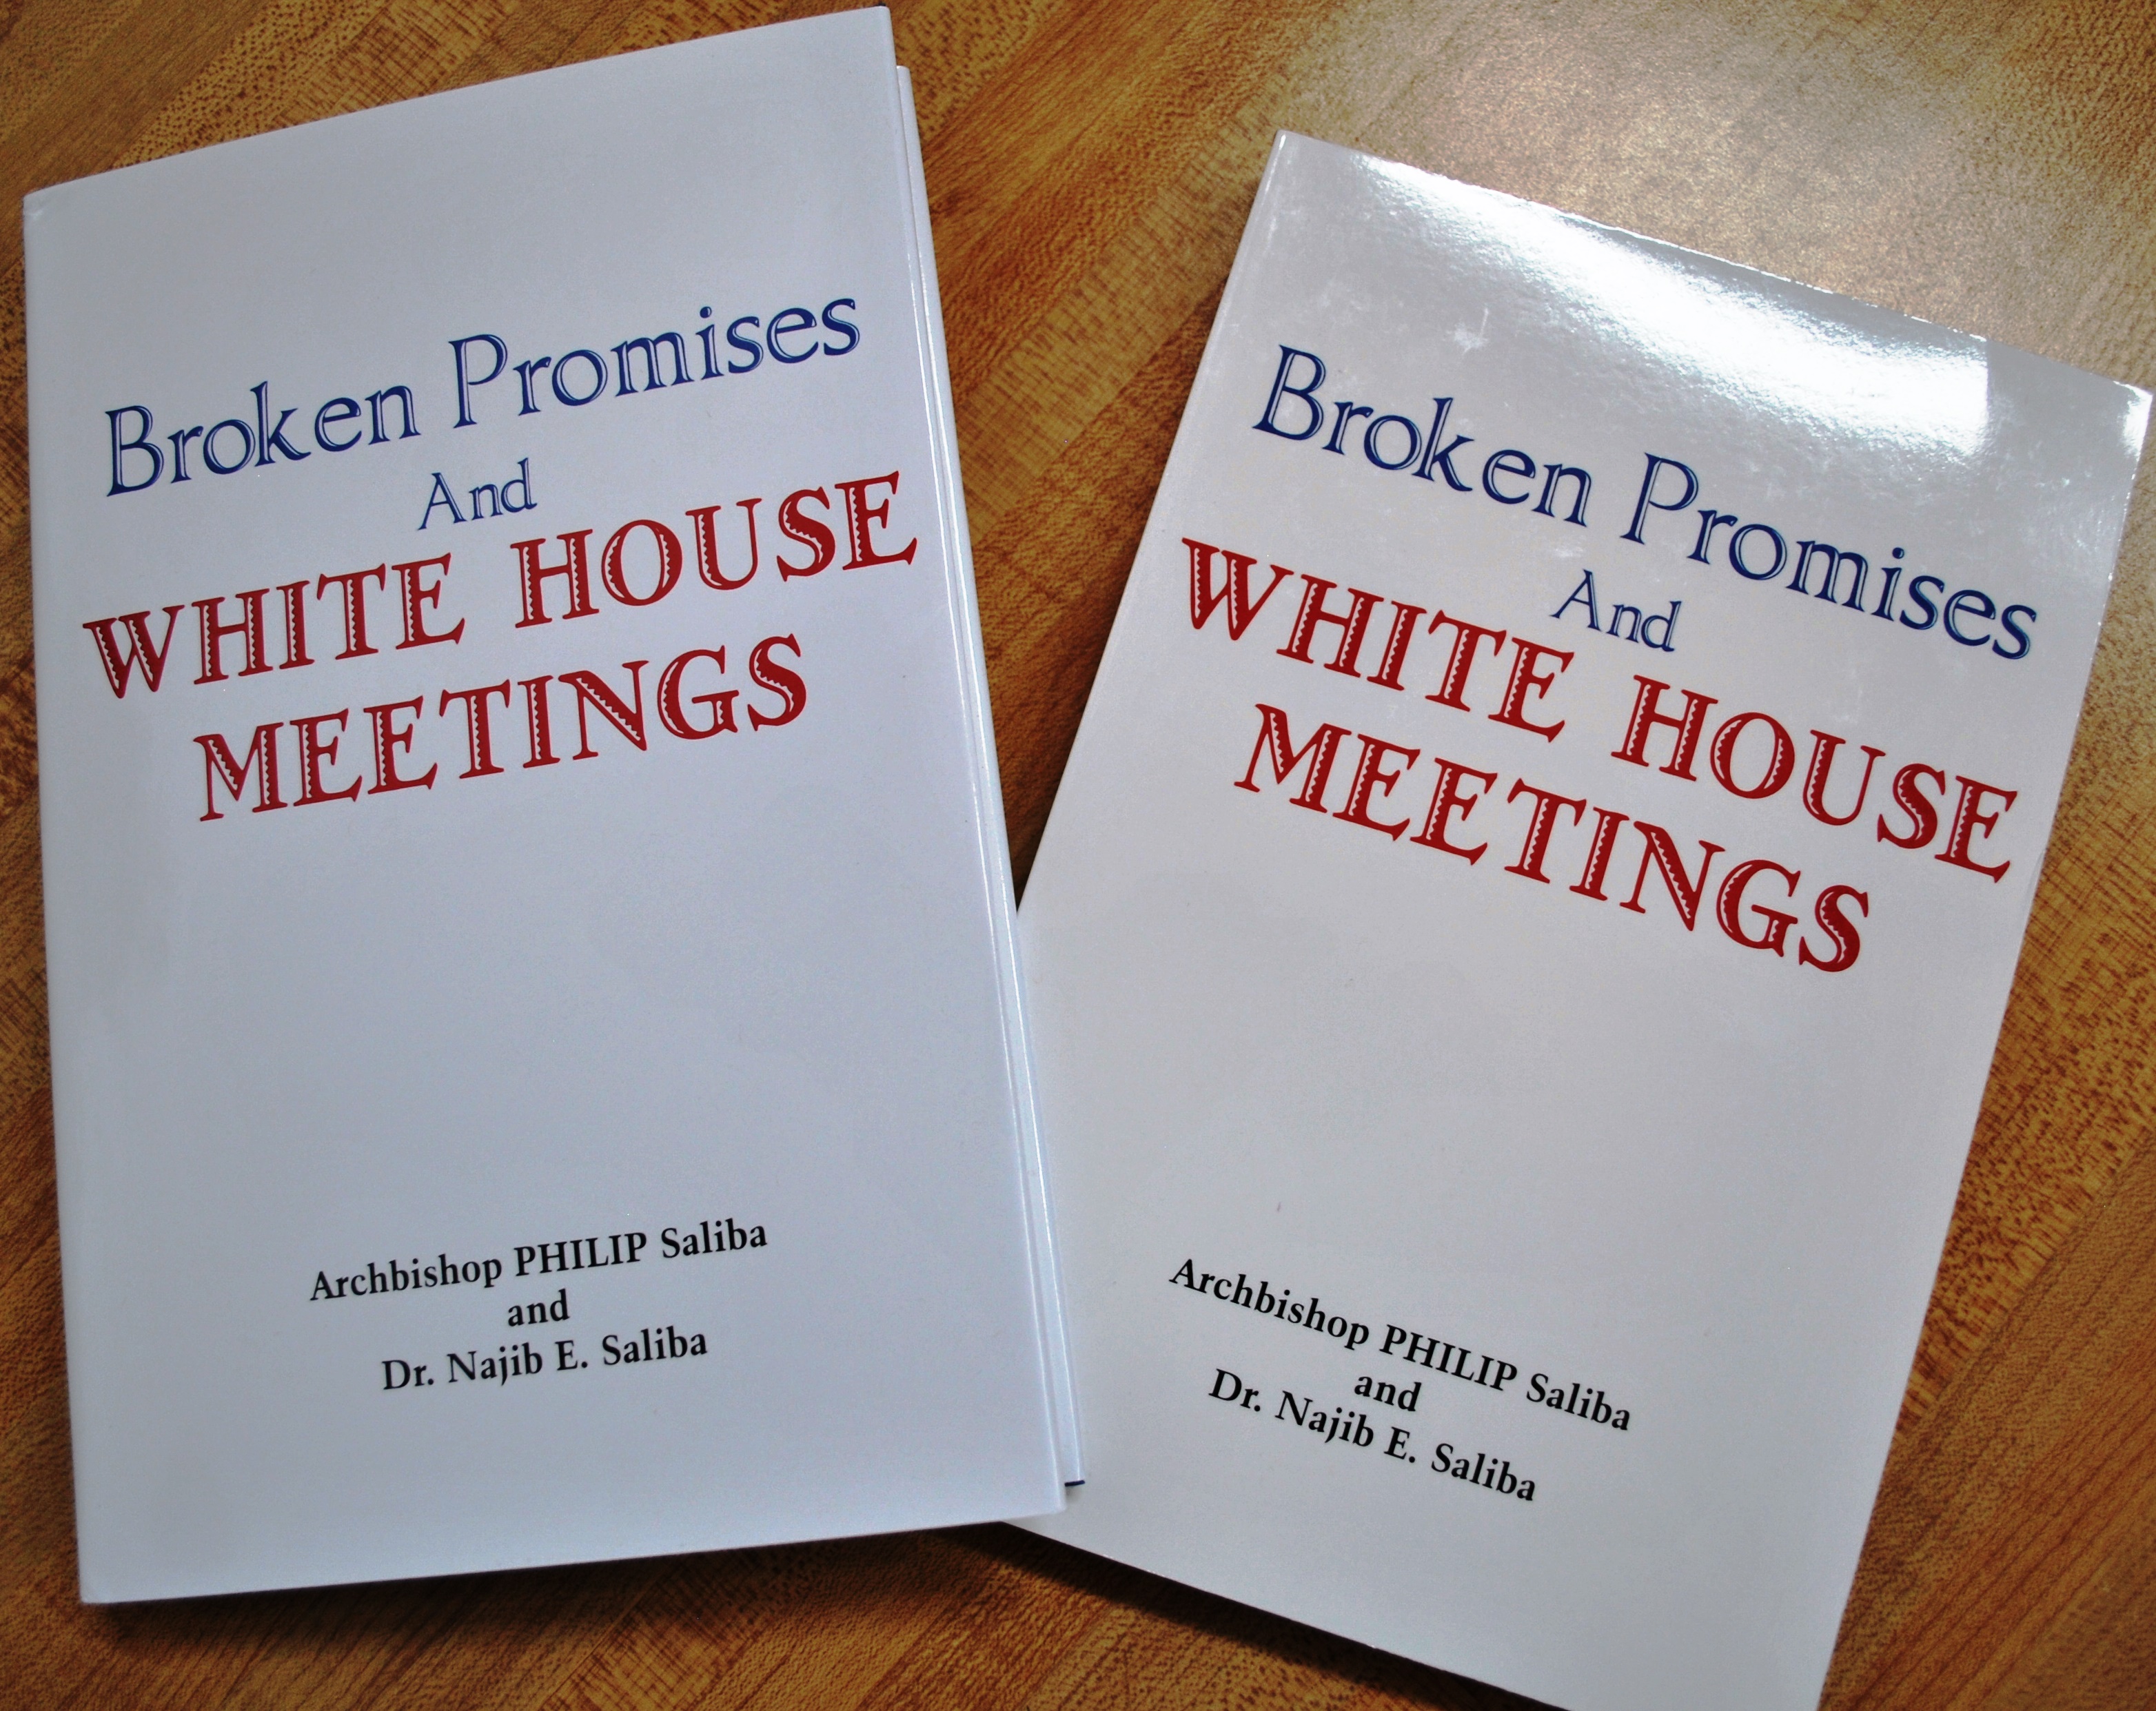 Broken Promises and White House Meetings